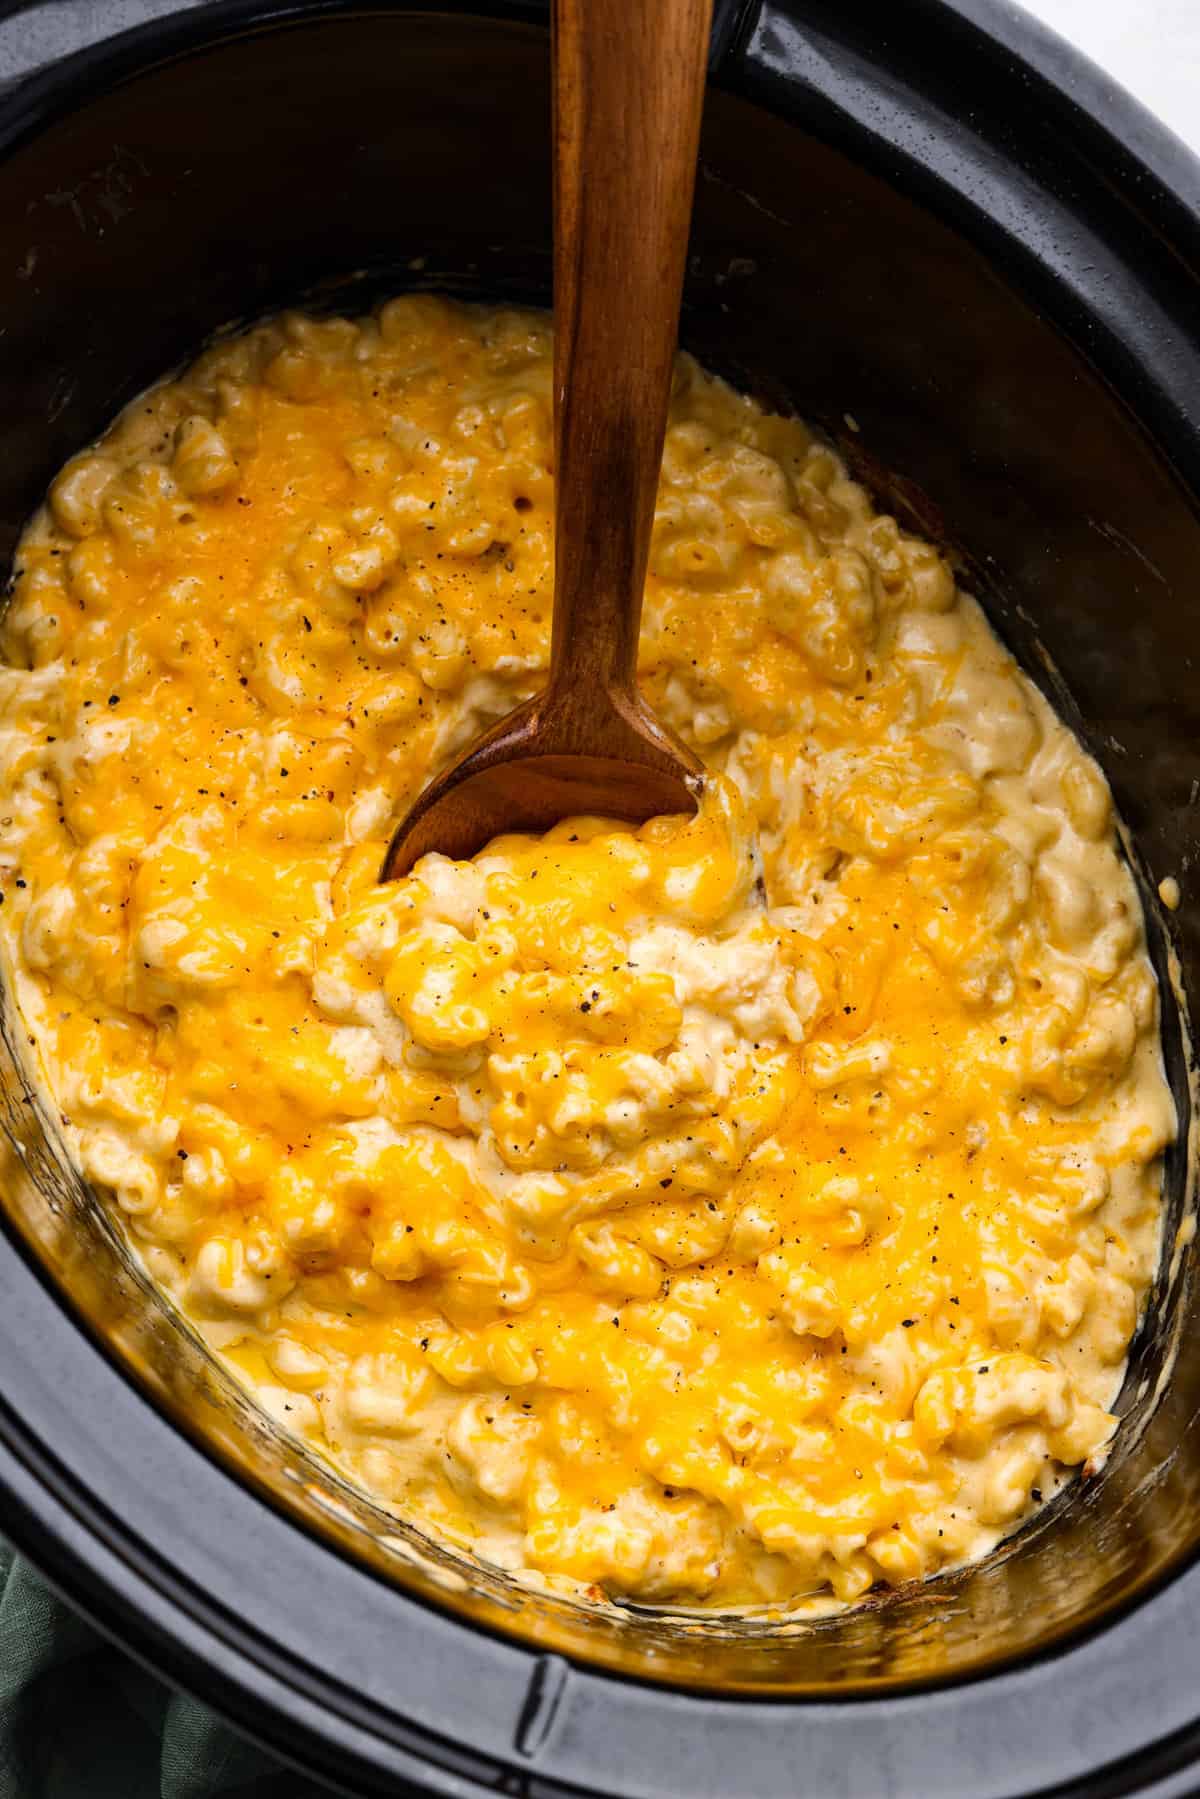 No Boil Slow Cooker Mac and Cheese